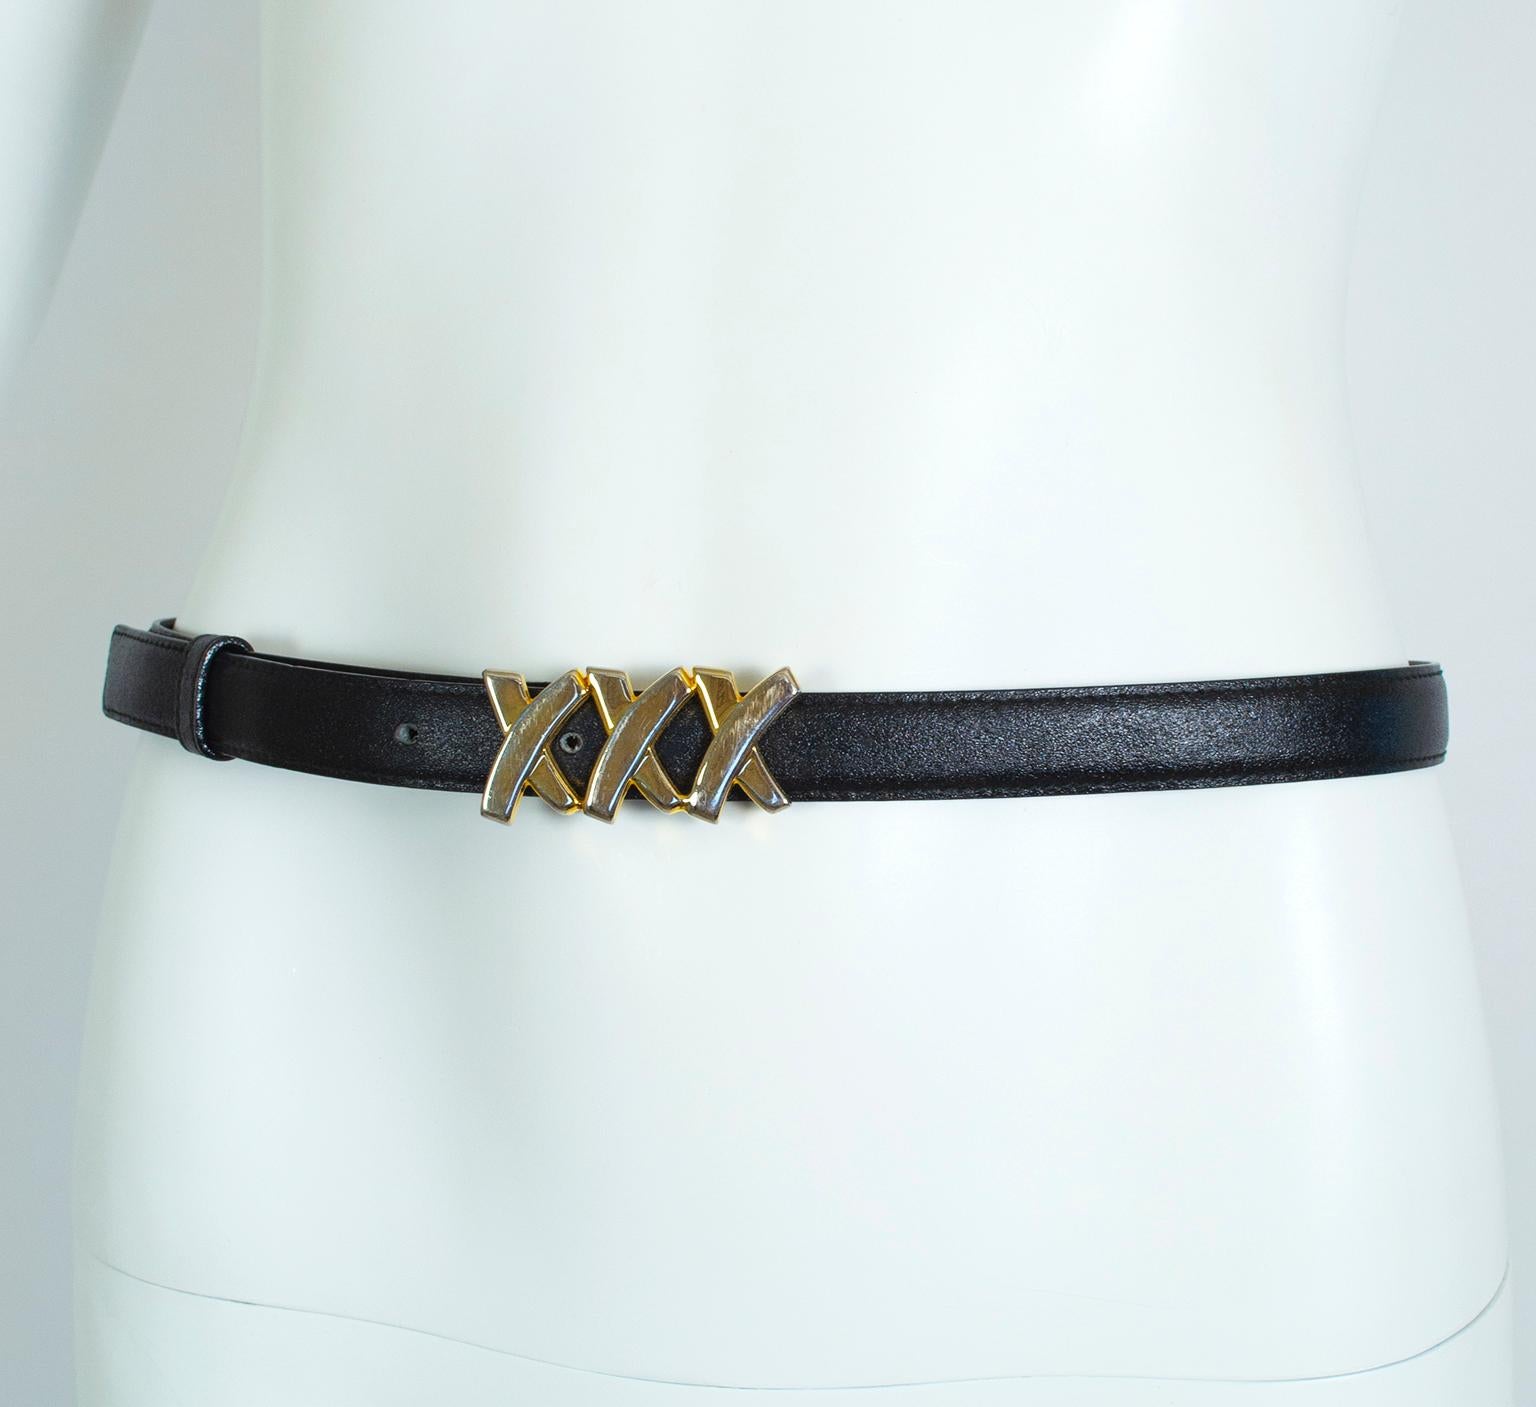 With its narrow profile, this glam Paloma Picasso belt will thread through all but the very skinniest belt loops and has just enough gold to complement your favorite Chanel 2.55 chain bag.

Black leather belt with gold hardware; tethered leather